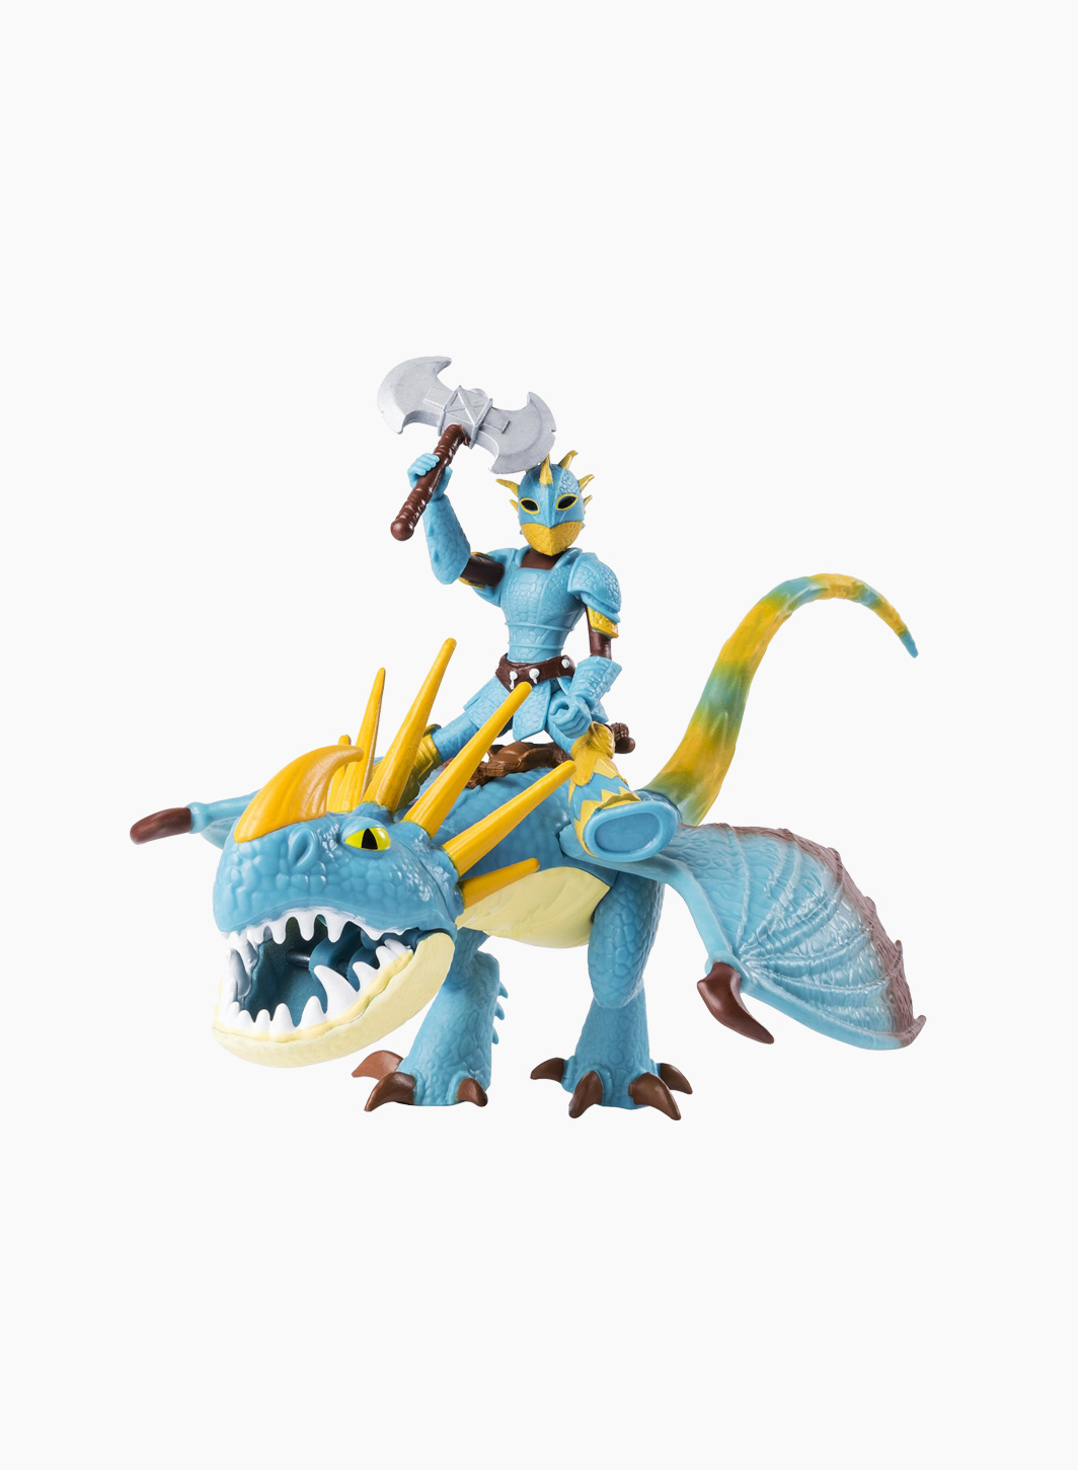 Spin Master Cartoon Character Figurines Dreamworks Dragons Stormfly and Astrid